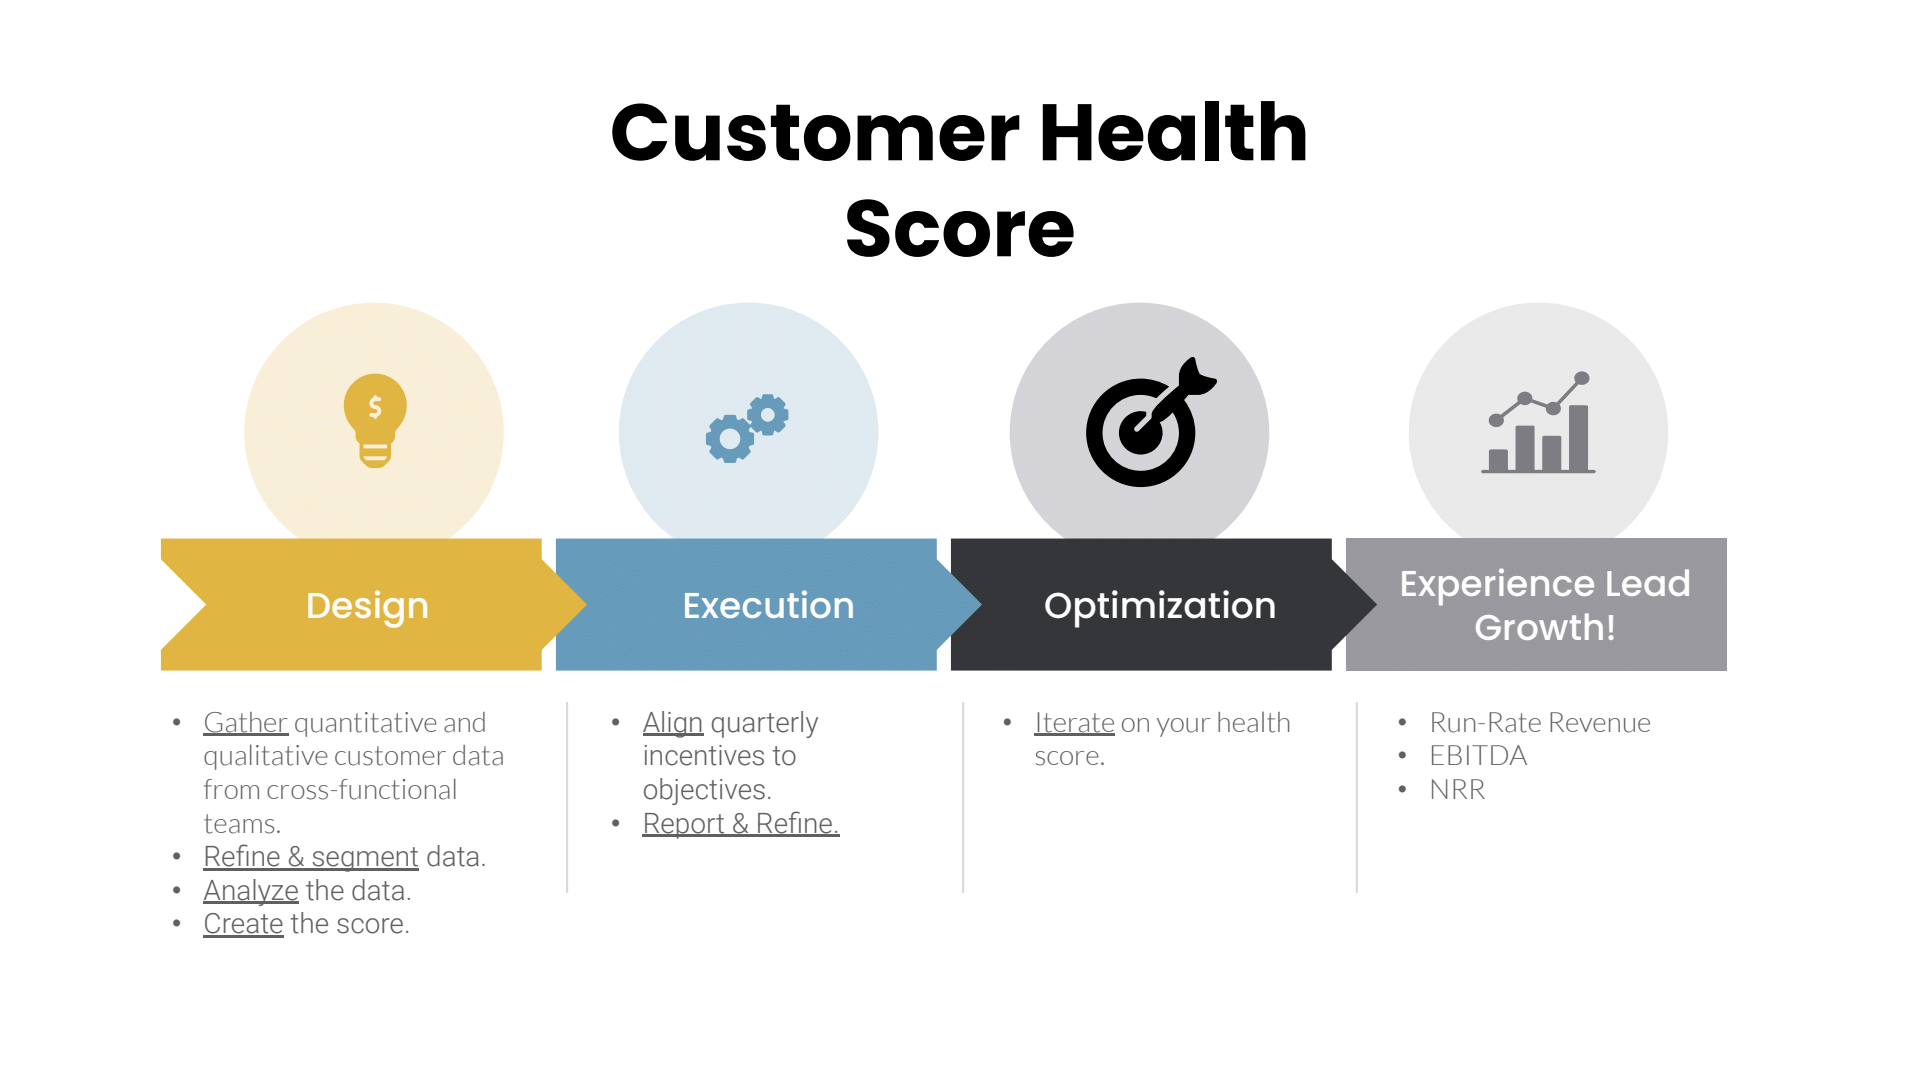 Image showing the stages of a customer health score: design, execution, optimization, and experience-led growth.